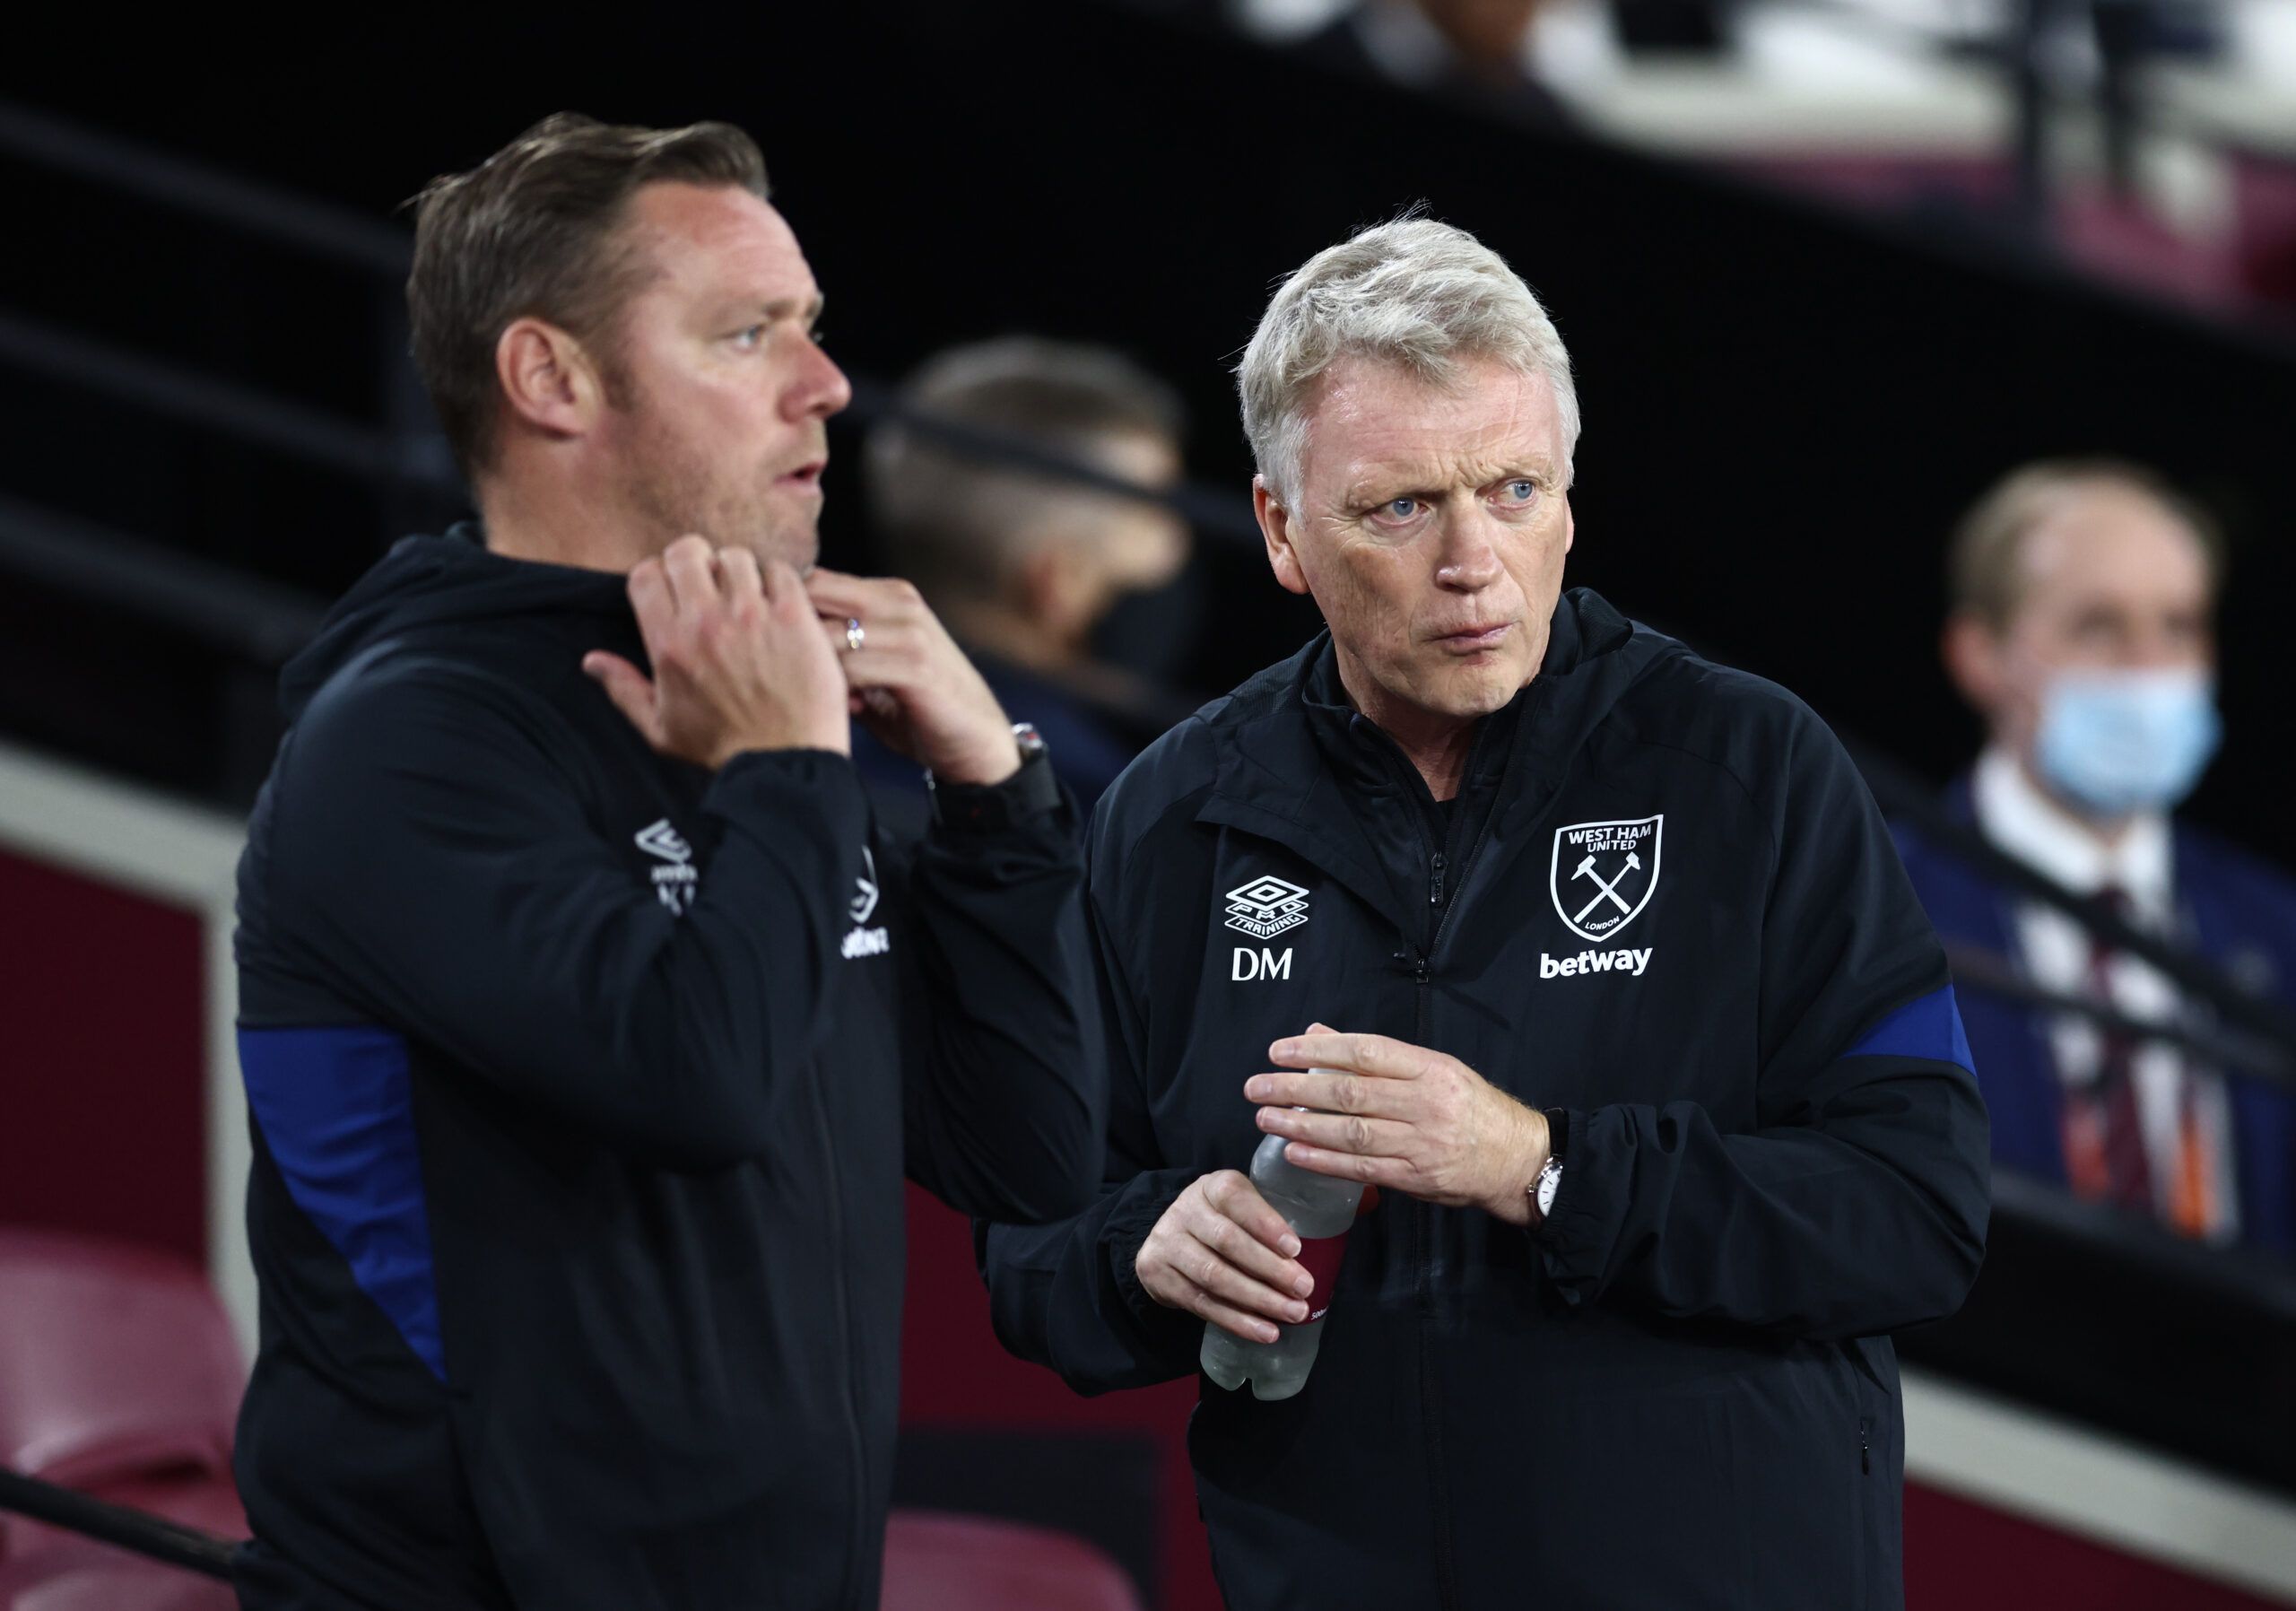 Soccer Football - Europa League - Group H - West Ham United v Rapid Vienna - London Stadium, London, Britain - September 30, 2021  West Ham United manager David Moyes and assistant coach Kevin Nolan before the match Action Images via Reuters/David Klein